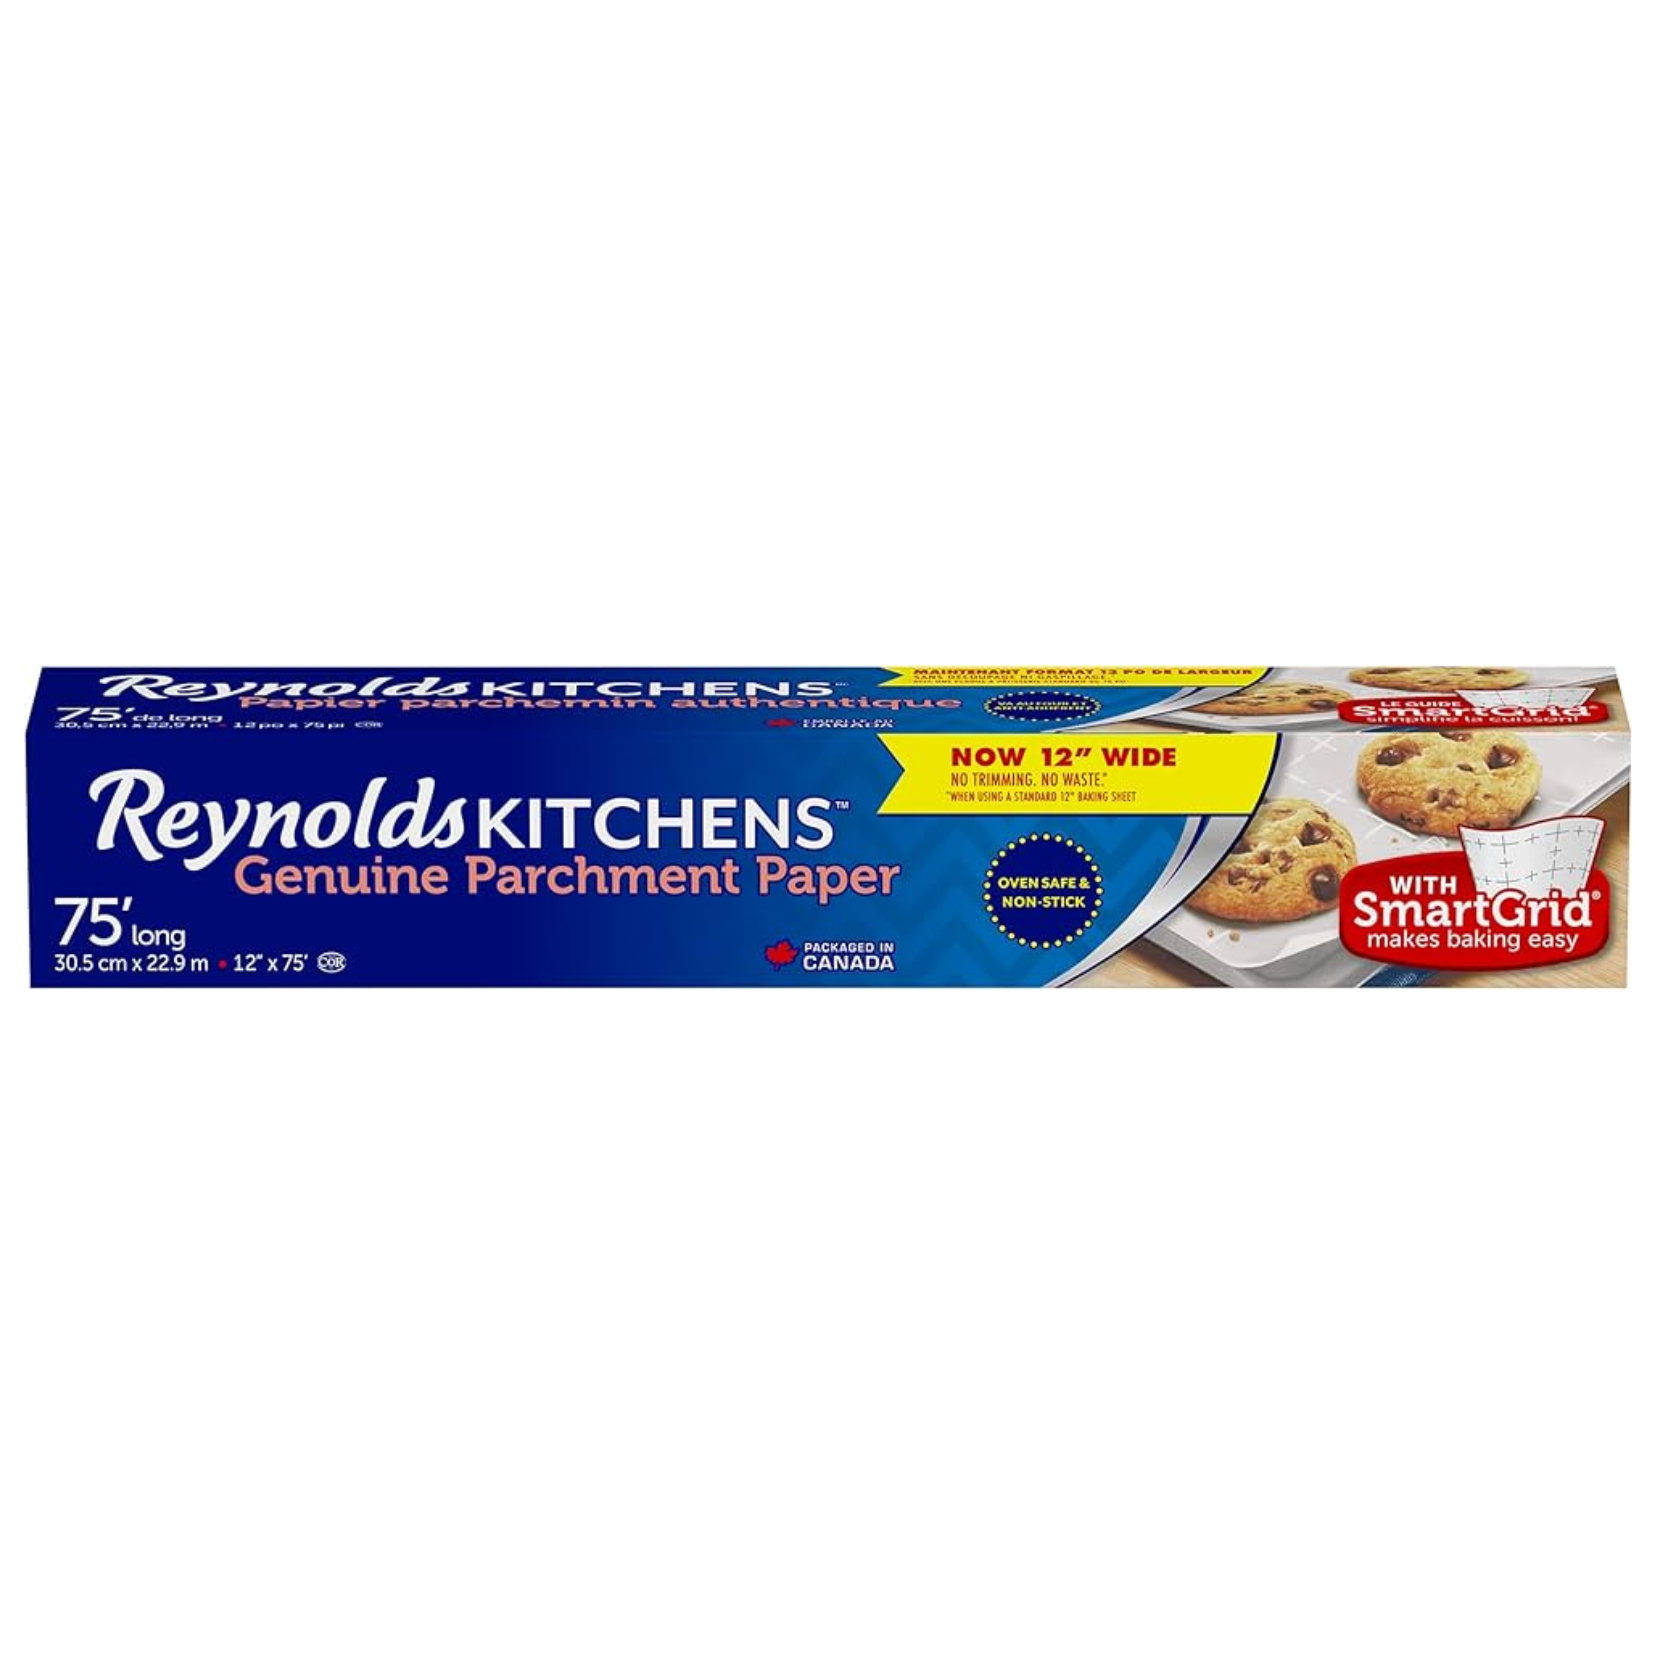 Reynolds Kitchens Parchment Paper With Smart Grid 12" x 75'